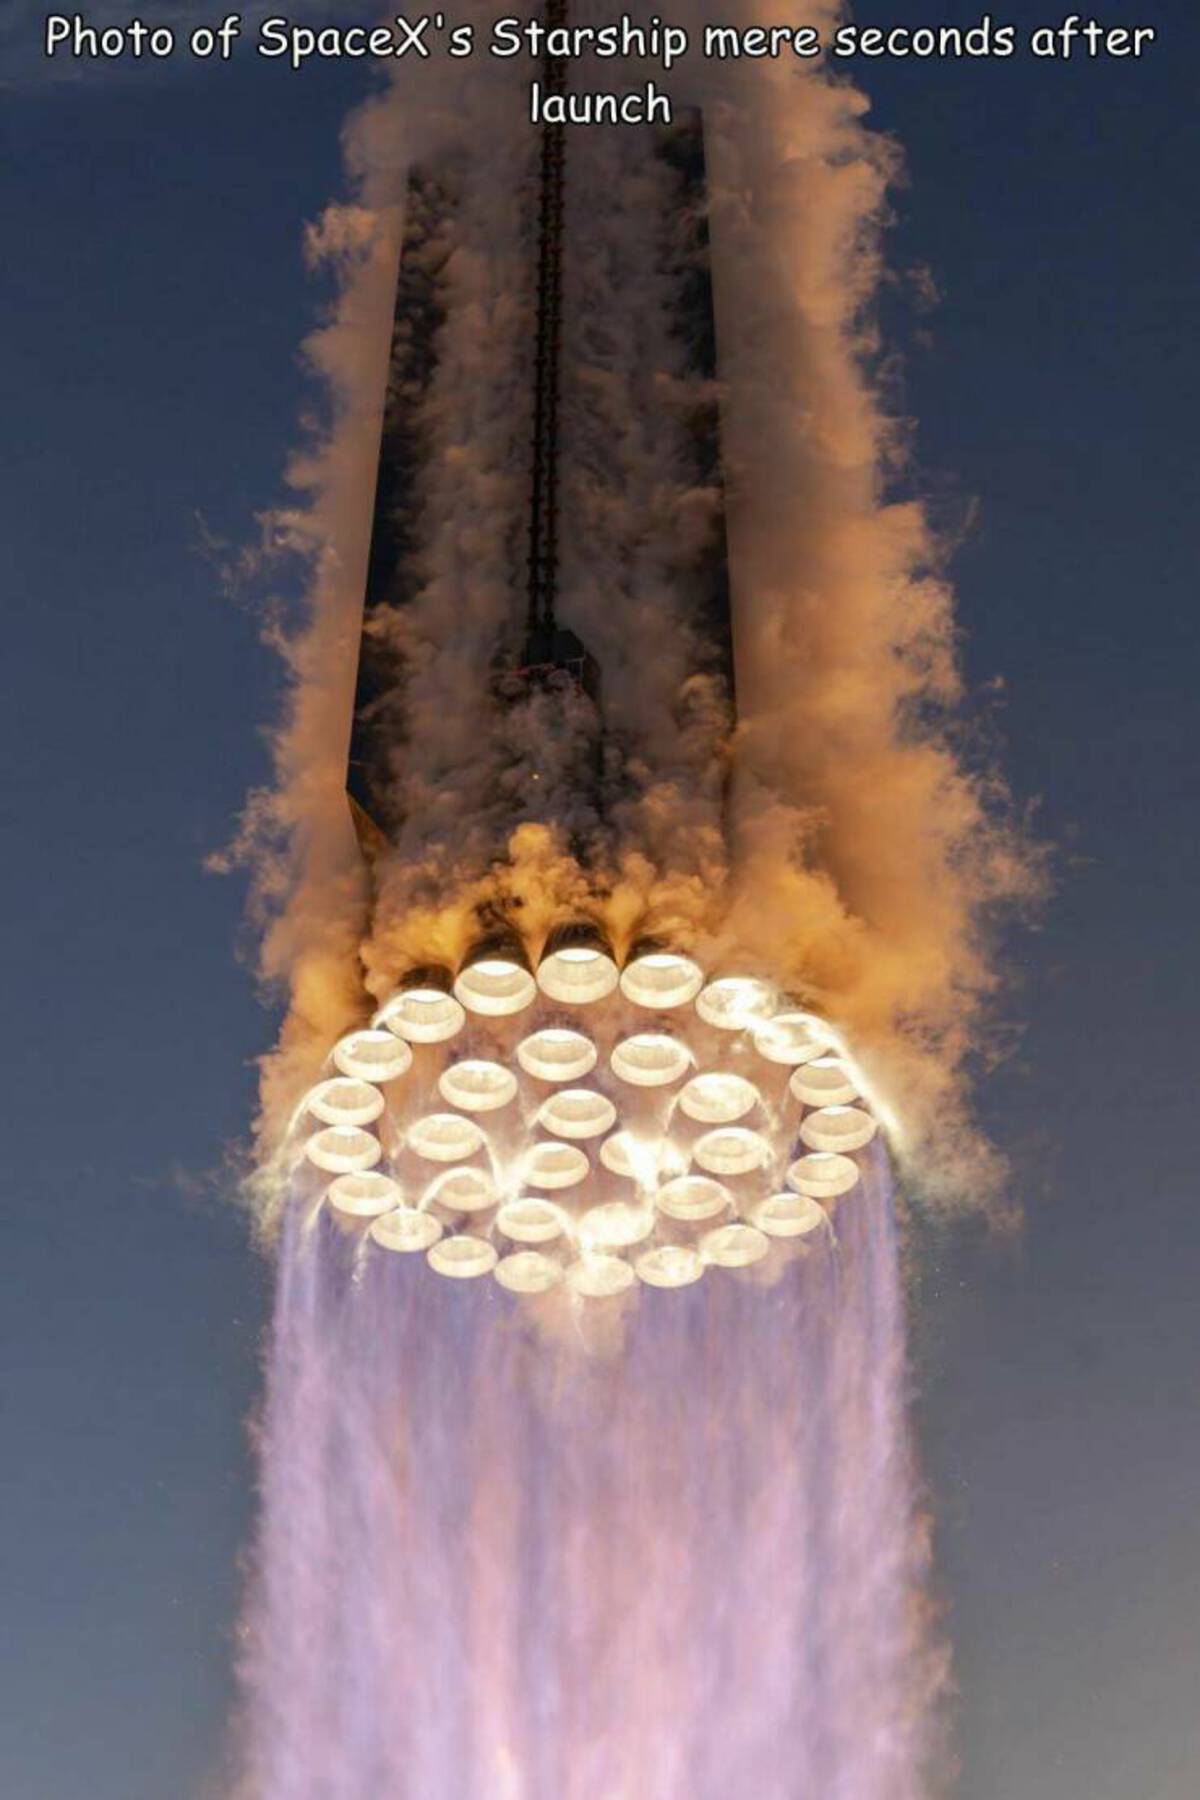 spacex starship - 0000 Photo of SpaceX's Starship mere seconds after launch